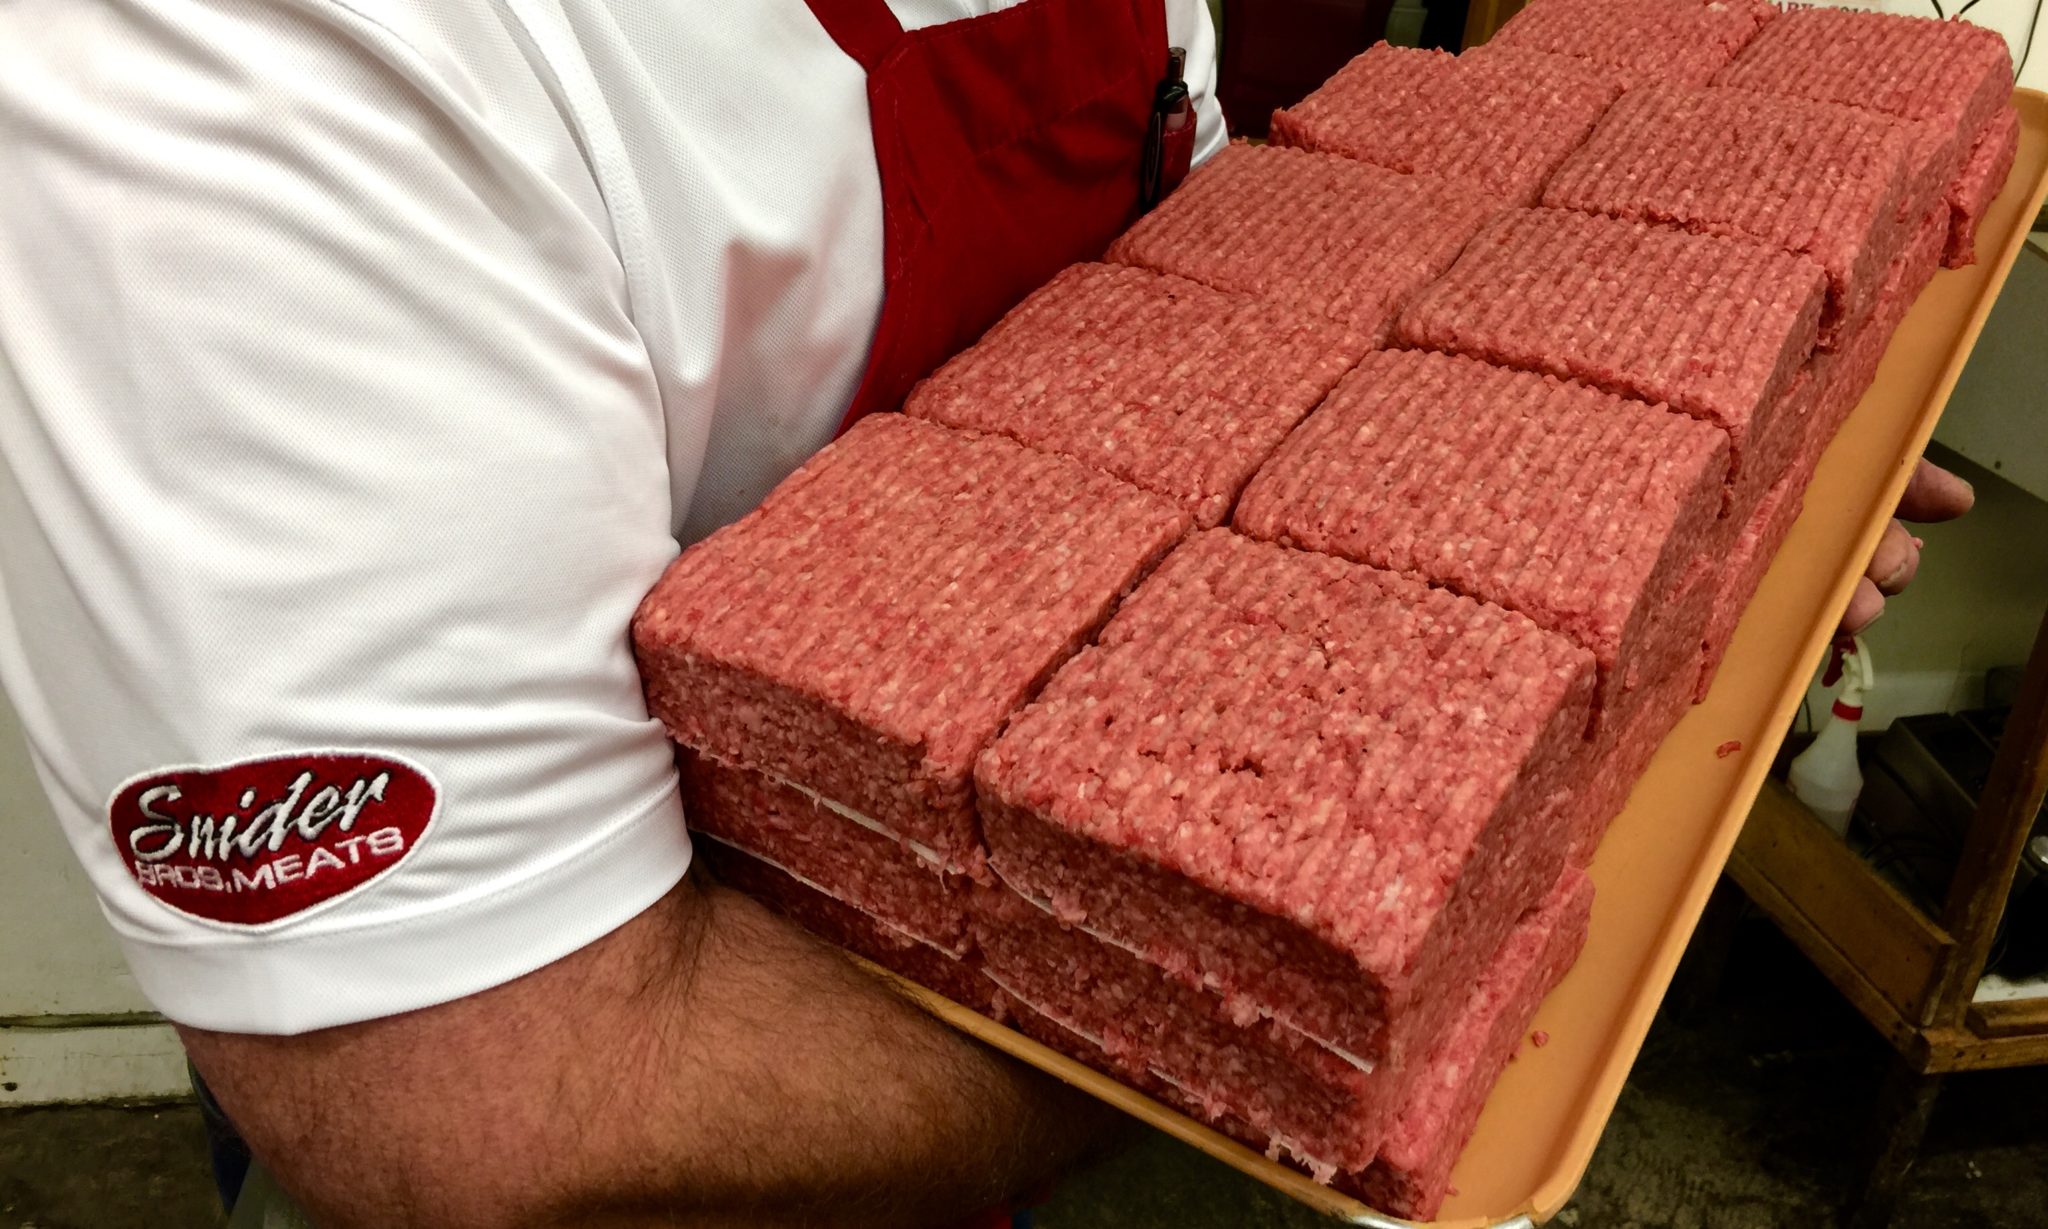 6 lb pack of Lean Ground Beef